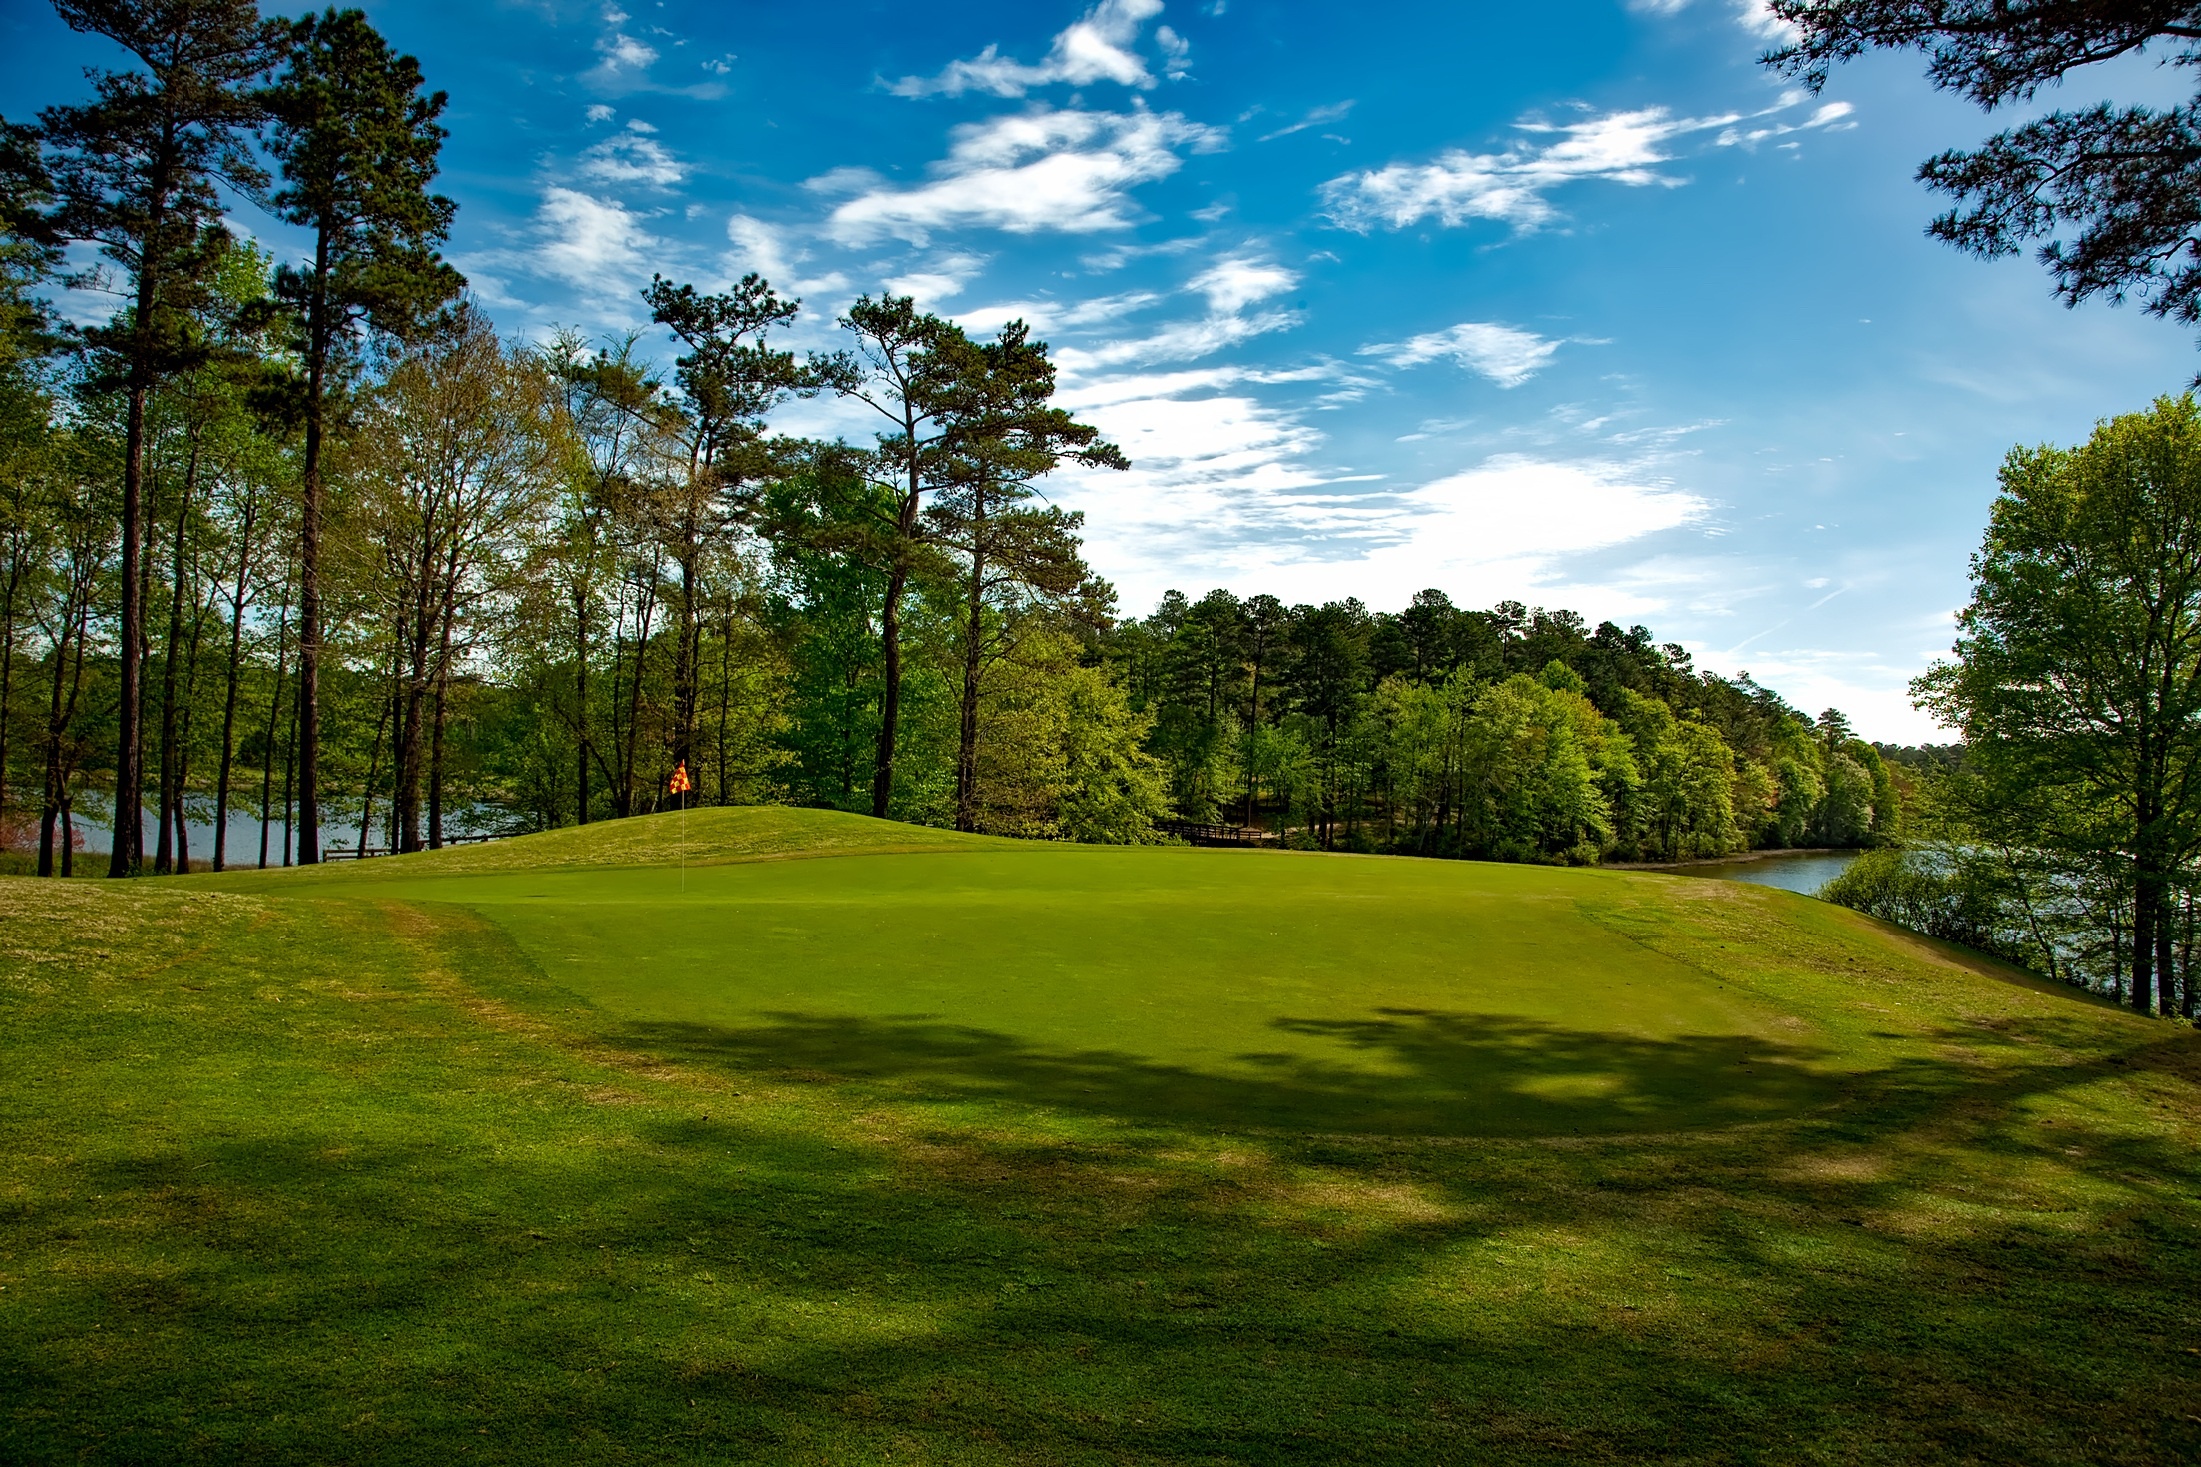 Golf Course: A tract of land with tees, greens, fairways, and hazards, Bogey, Break, Eagle. 2210x1470 HD Wallpaper.